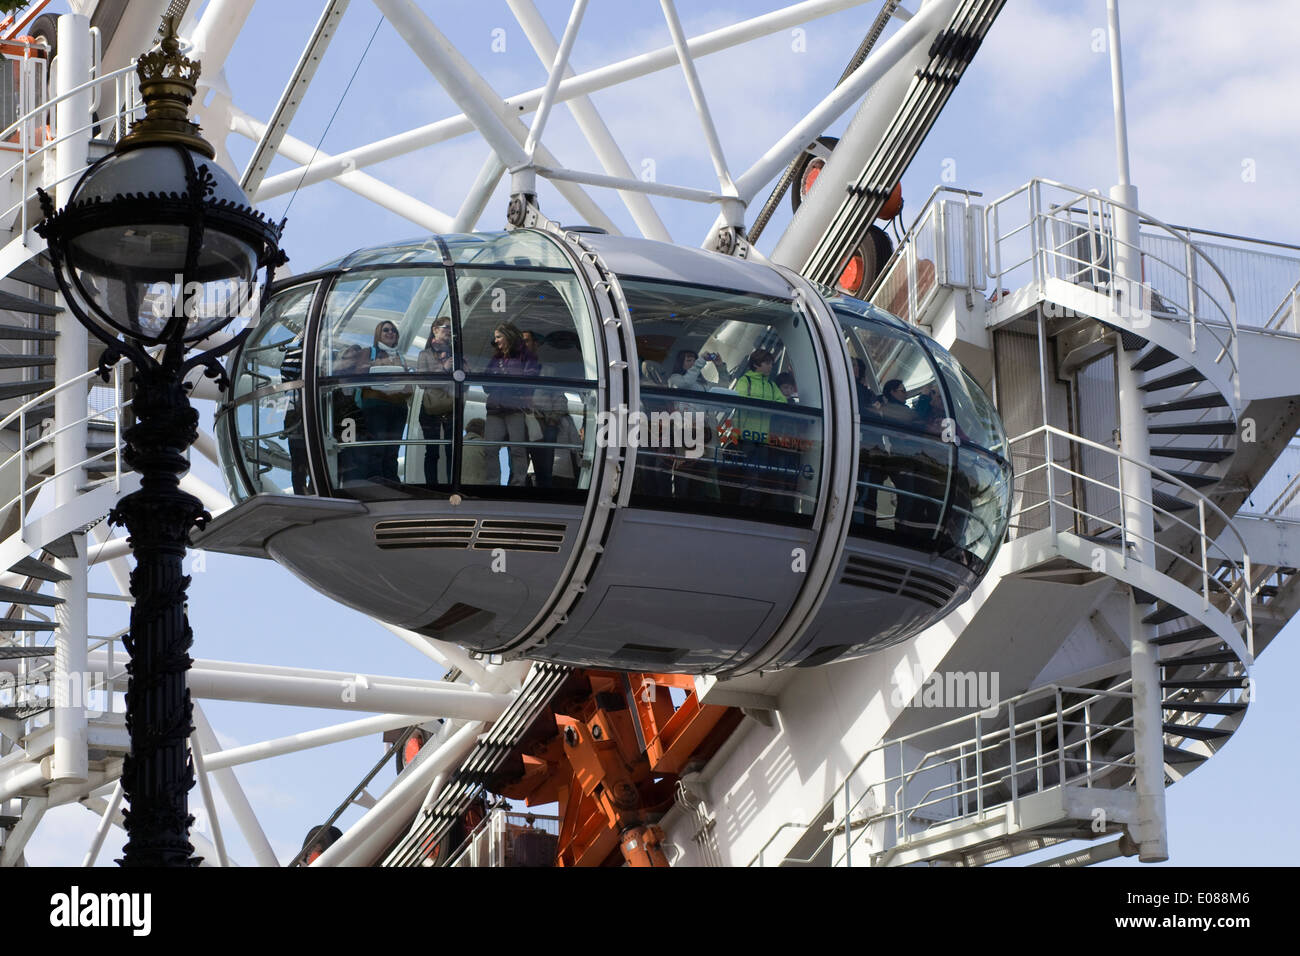 A View of the London Eye on the Banks of the river Thames London Stock Photo